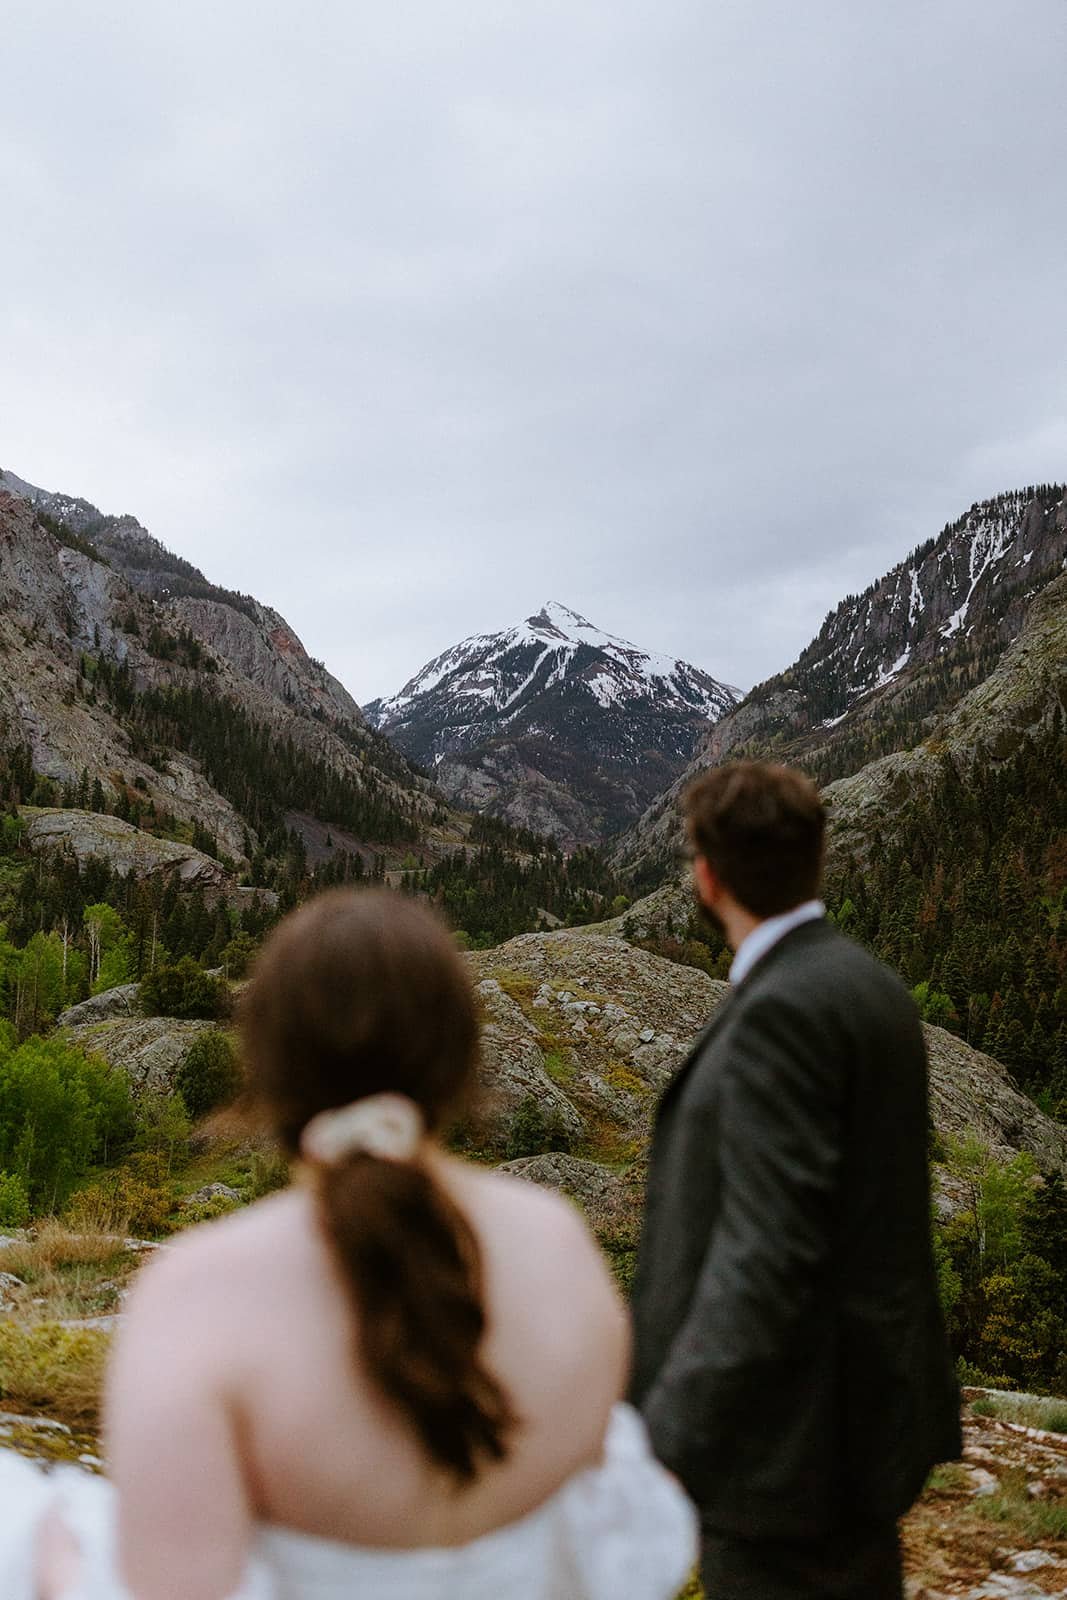 A man and woman explore an overlook off the Million Dollar Highway outside of Ridgway